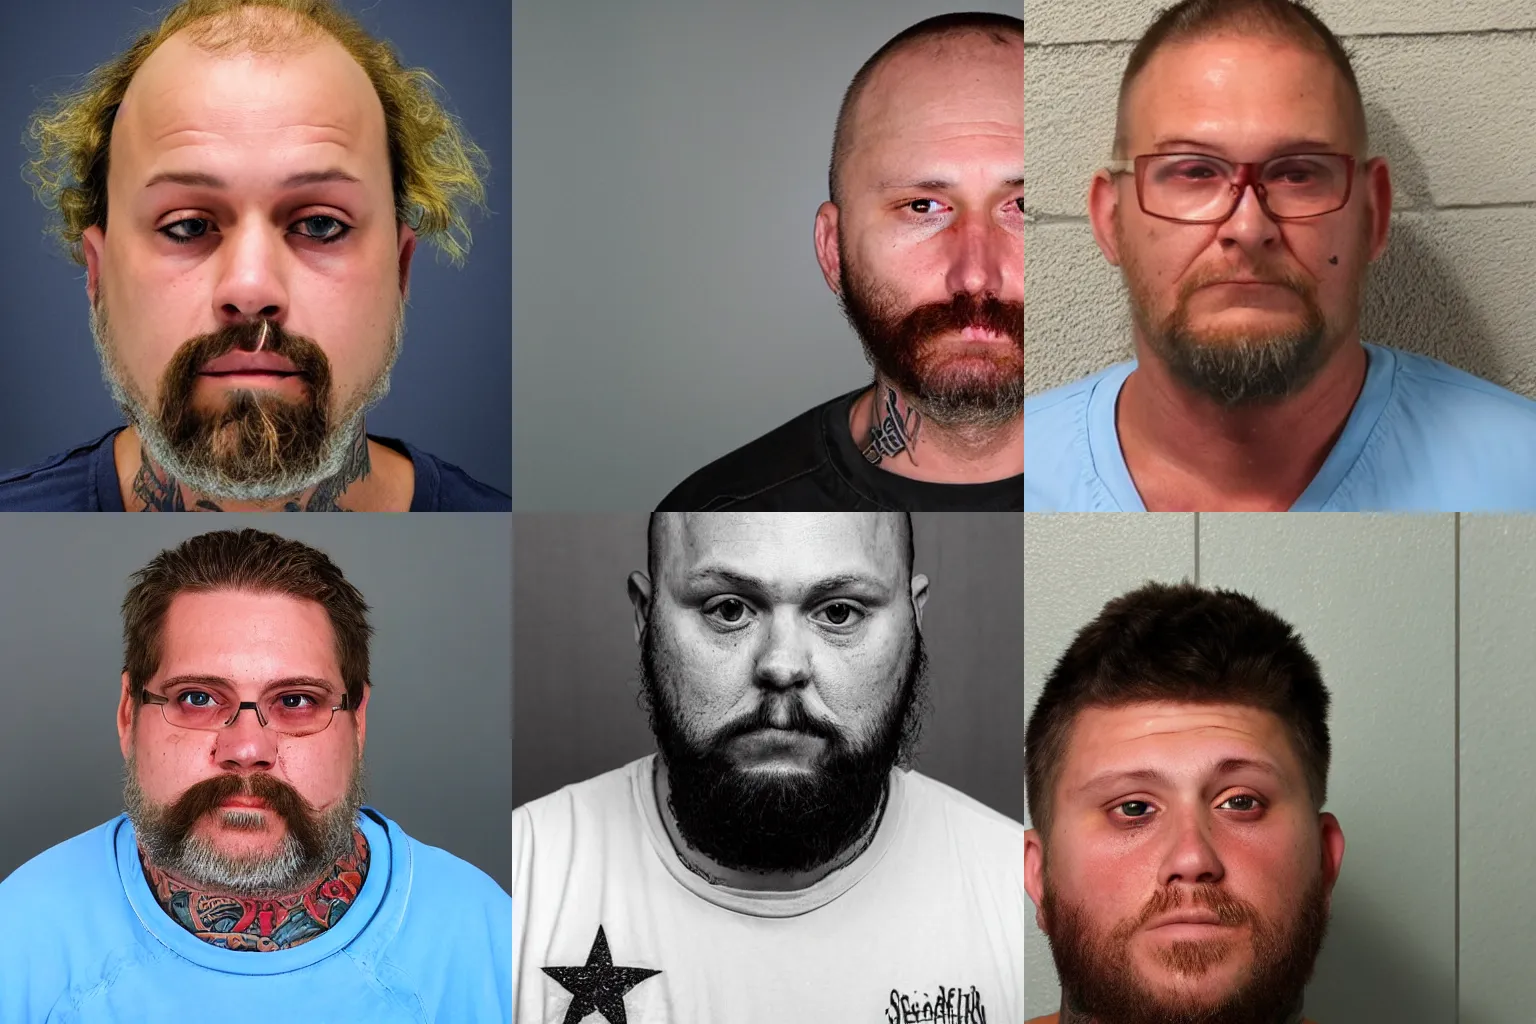 Prompt: headshot mugshot photo of the Florida Man of the Year 2020, cross-eyed, toothless, gang tattoos, unkempt neckbeard, 45 degrees from the side